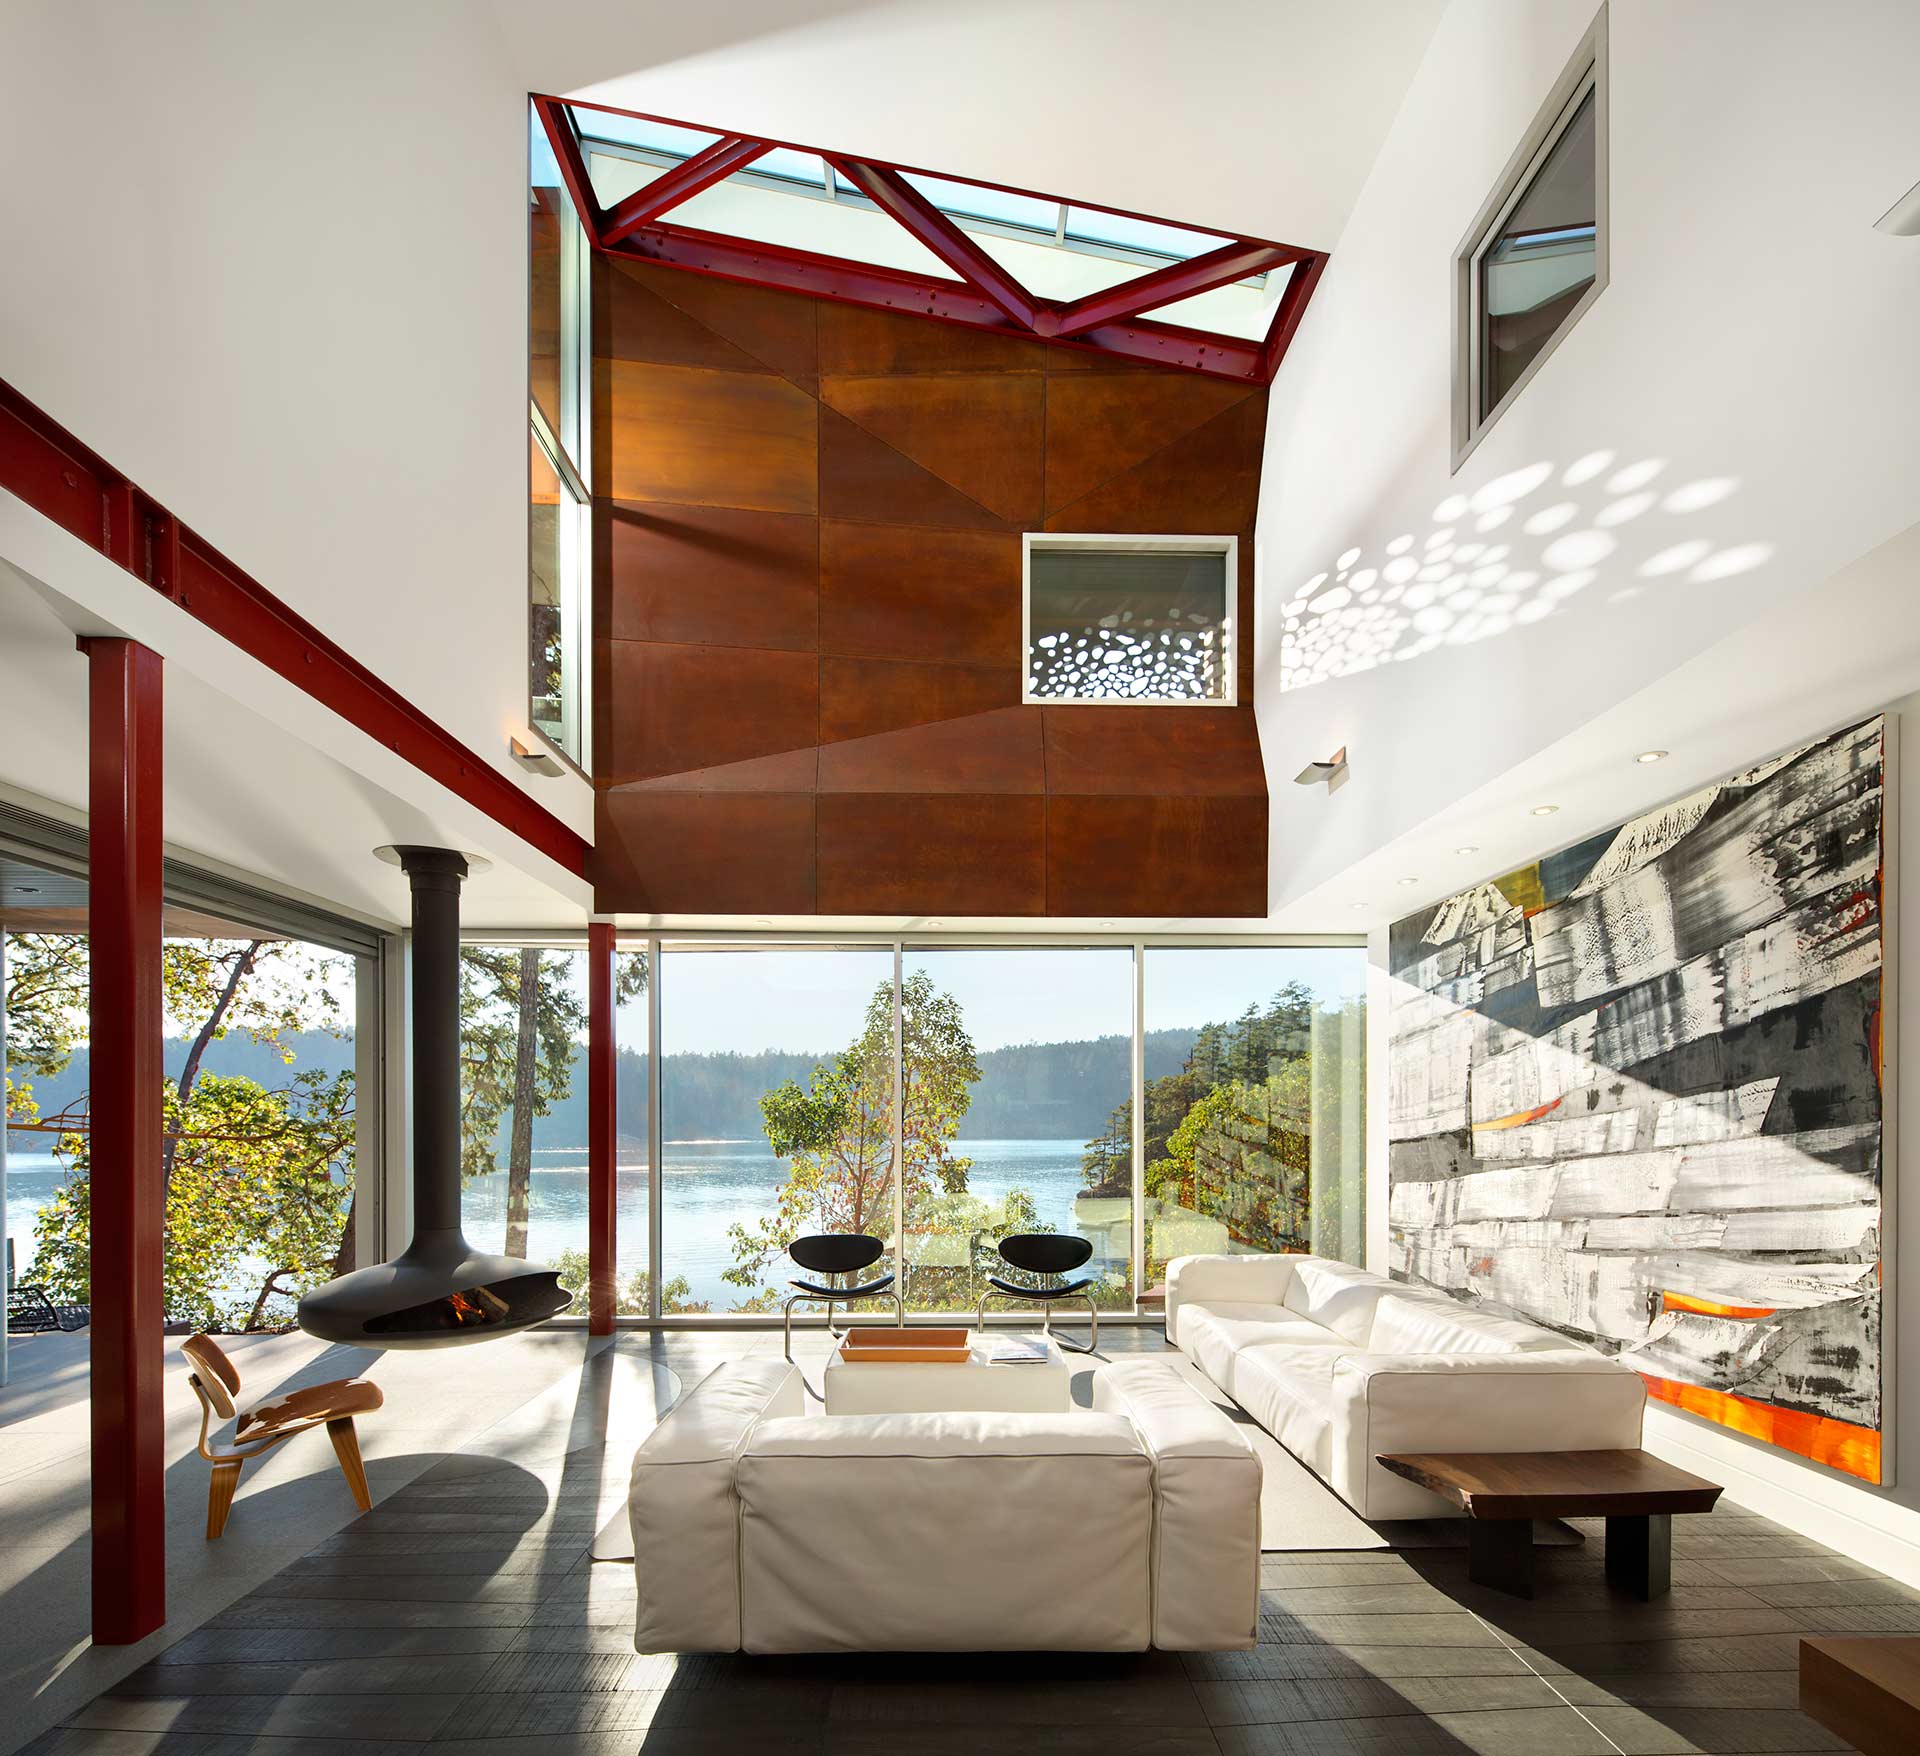 The AA Robins Architect-designed Gulf Islands Residence uses Zahner Solanum Steel for both interior and exterior cladding.